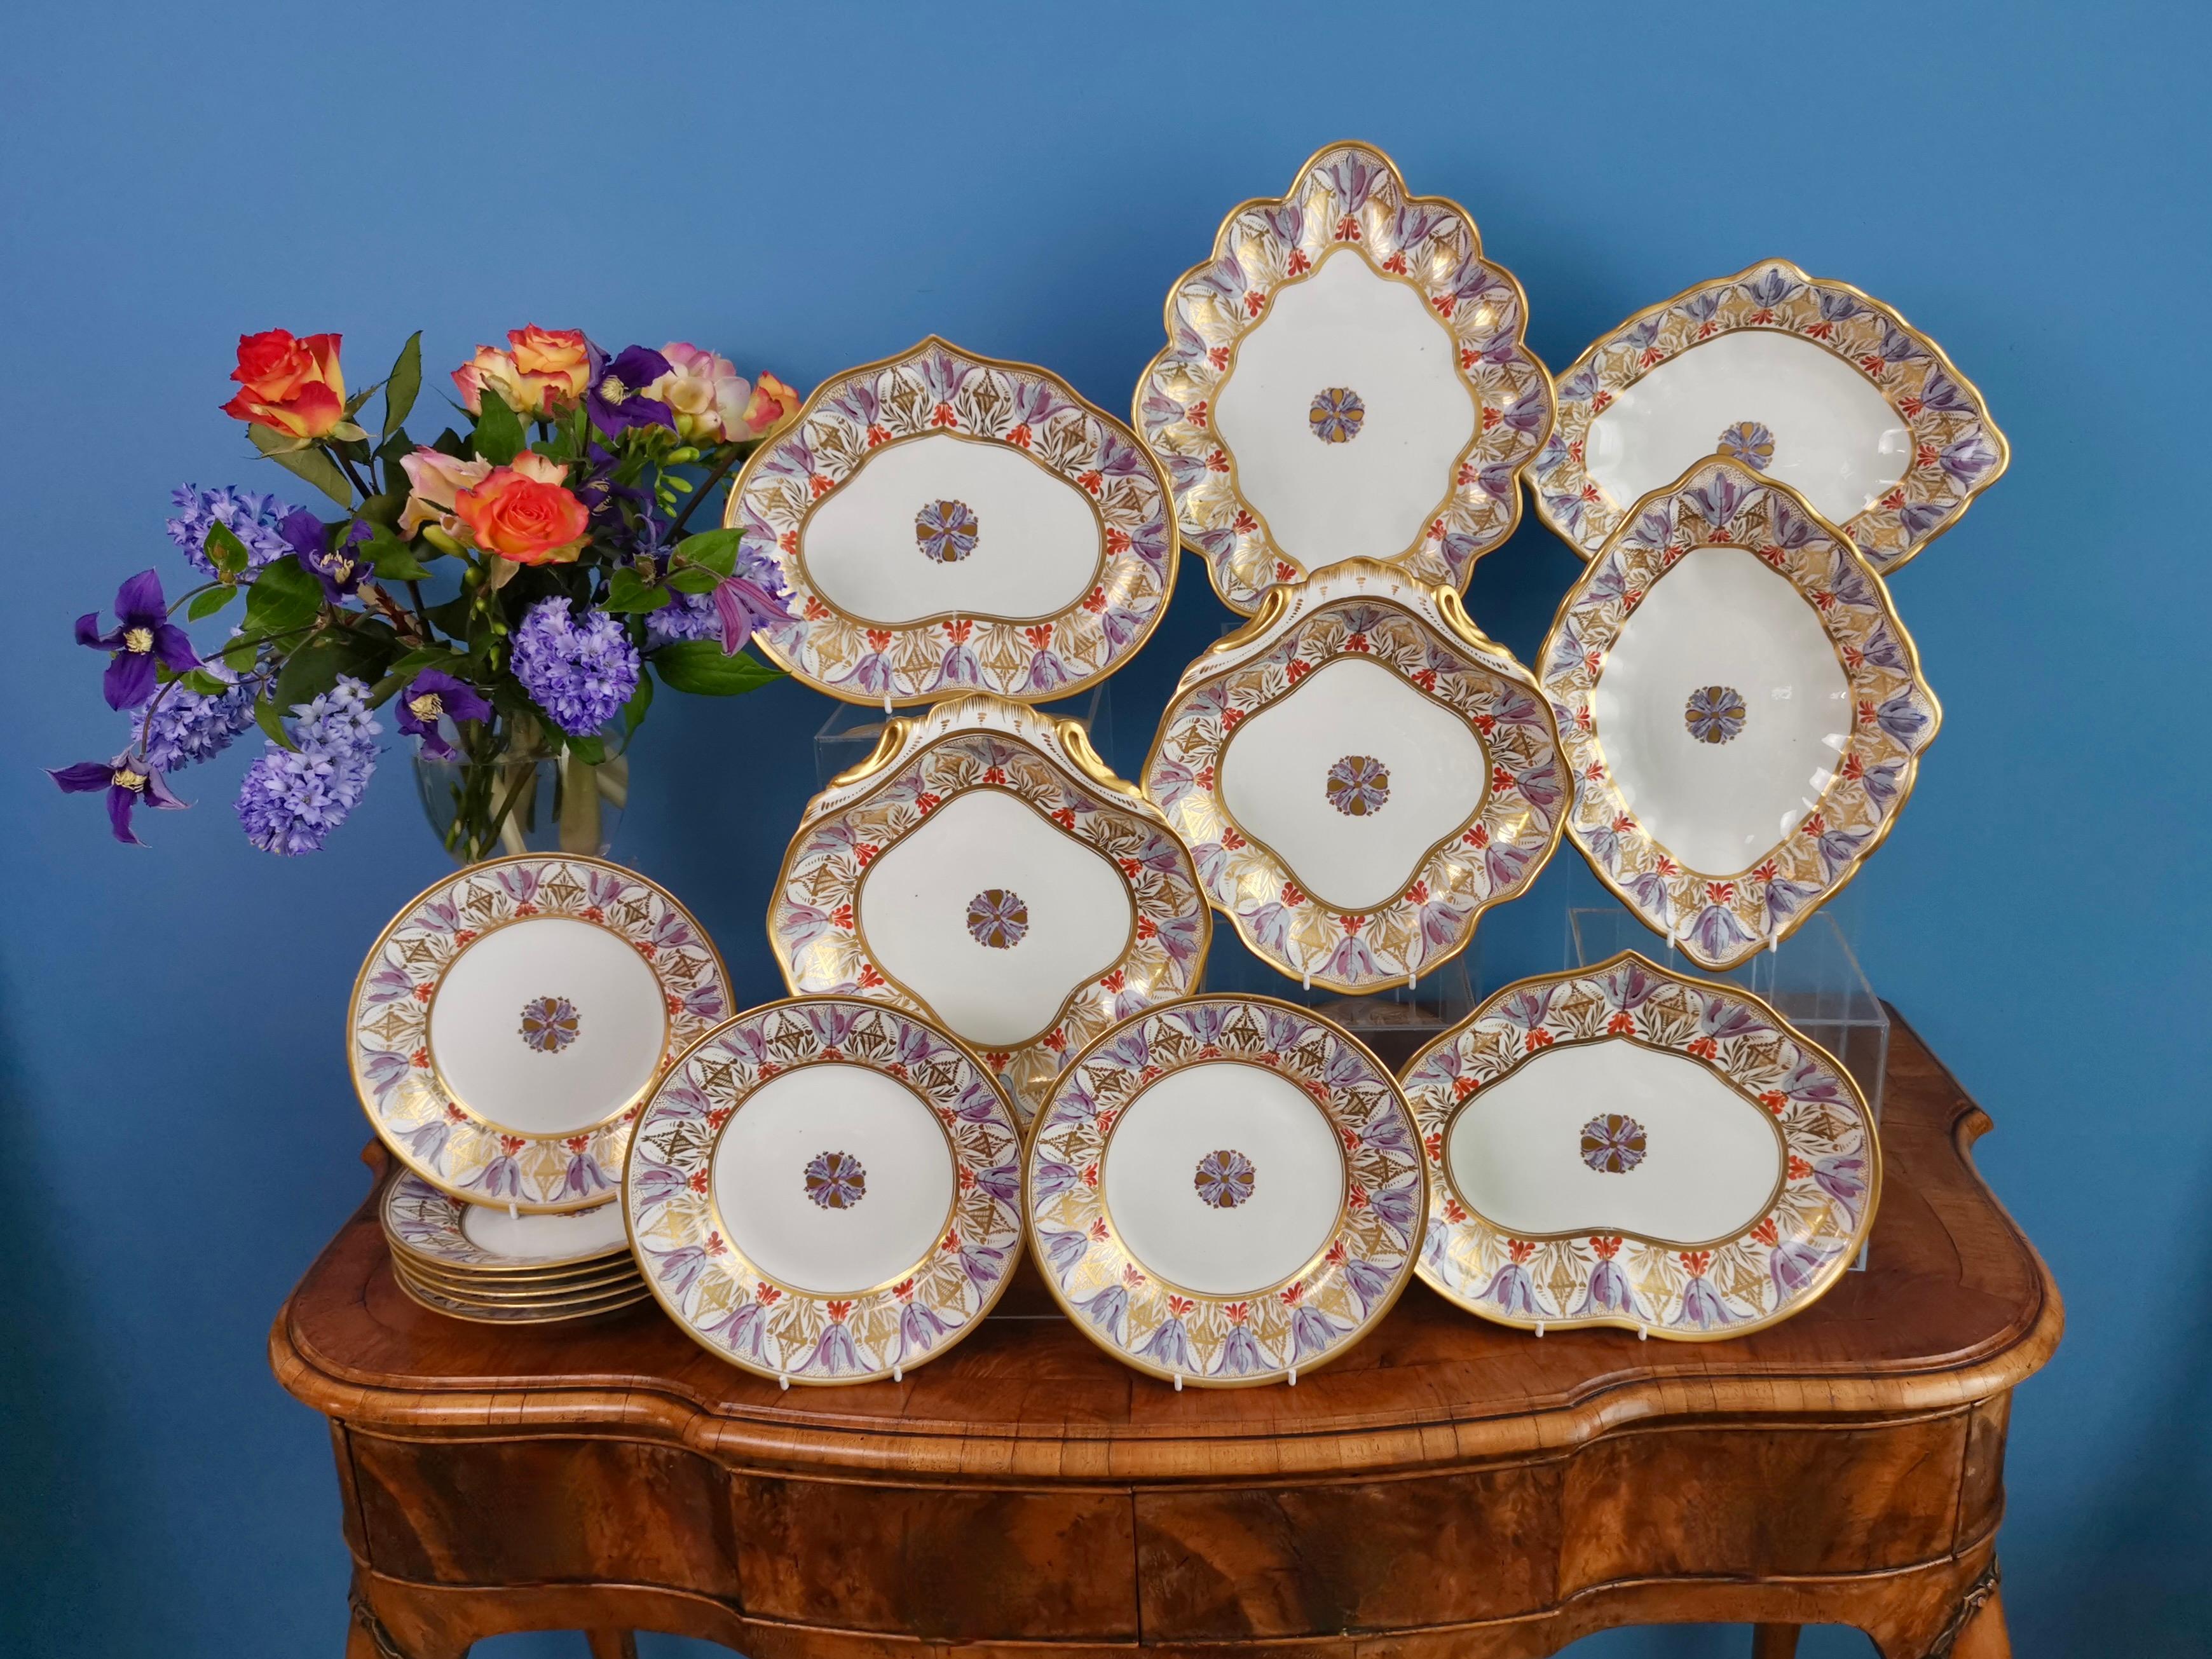 This is a stunning dessert service made by Derby between 1815 and 1820, which was the Regency era. The service consists of one large diamond shaped dish, two smaller diamond dishes, two kidney shaped dishes, two square shell dishes, and eight